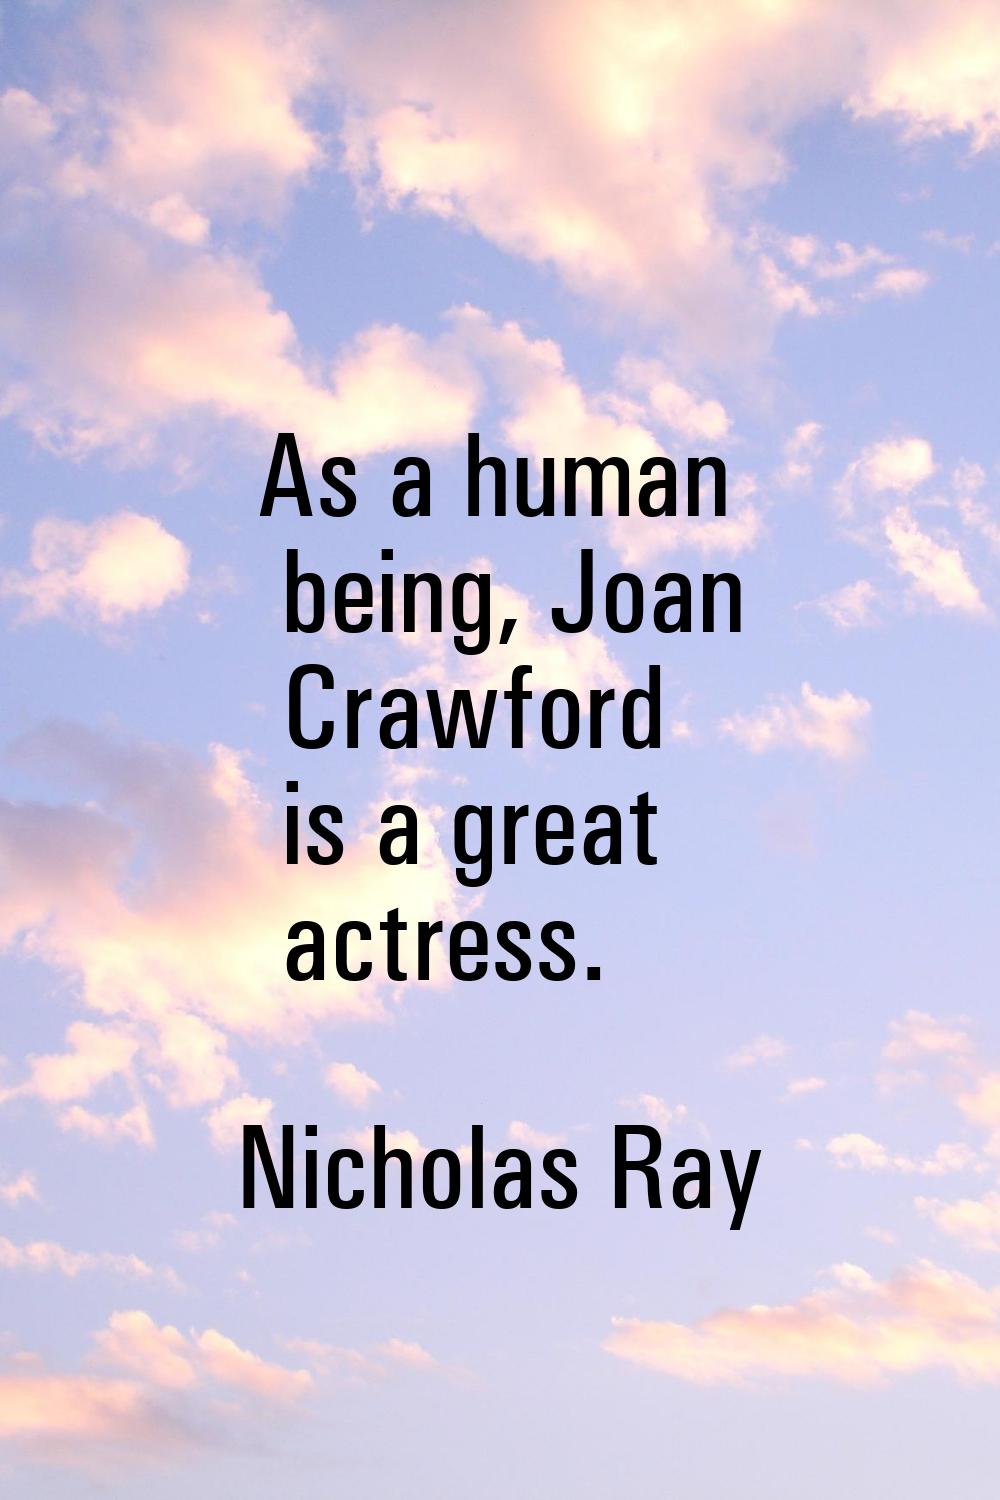 As a human being, Joan Crawford is a great actress.